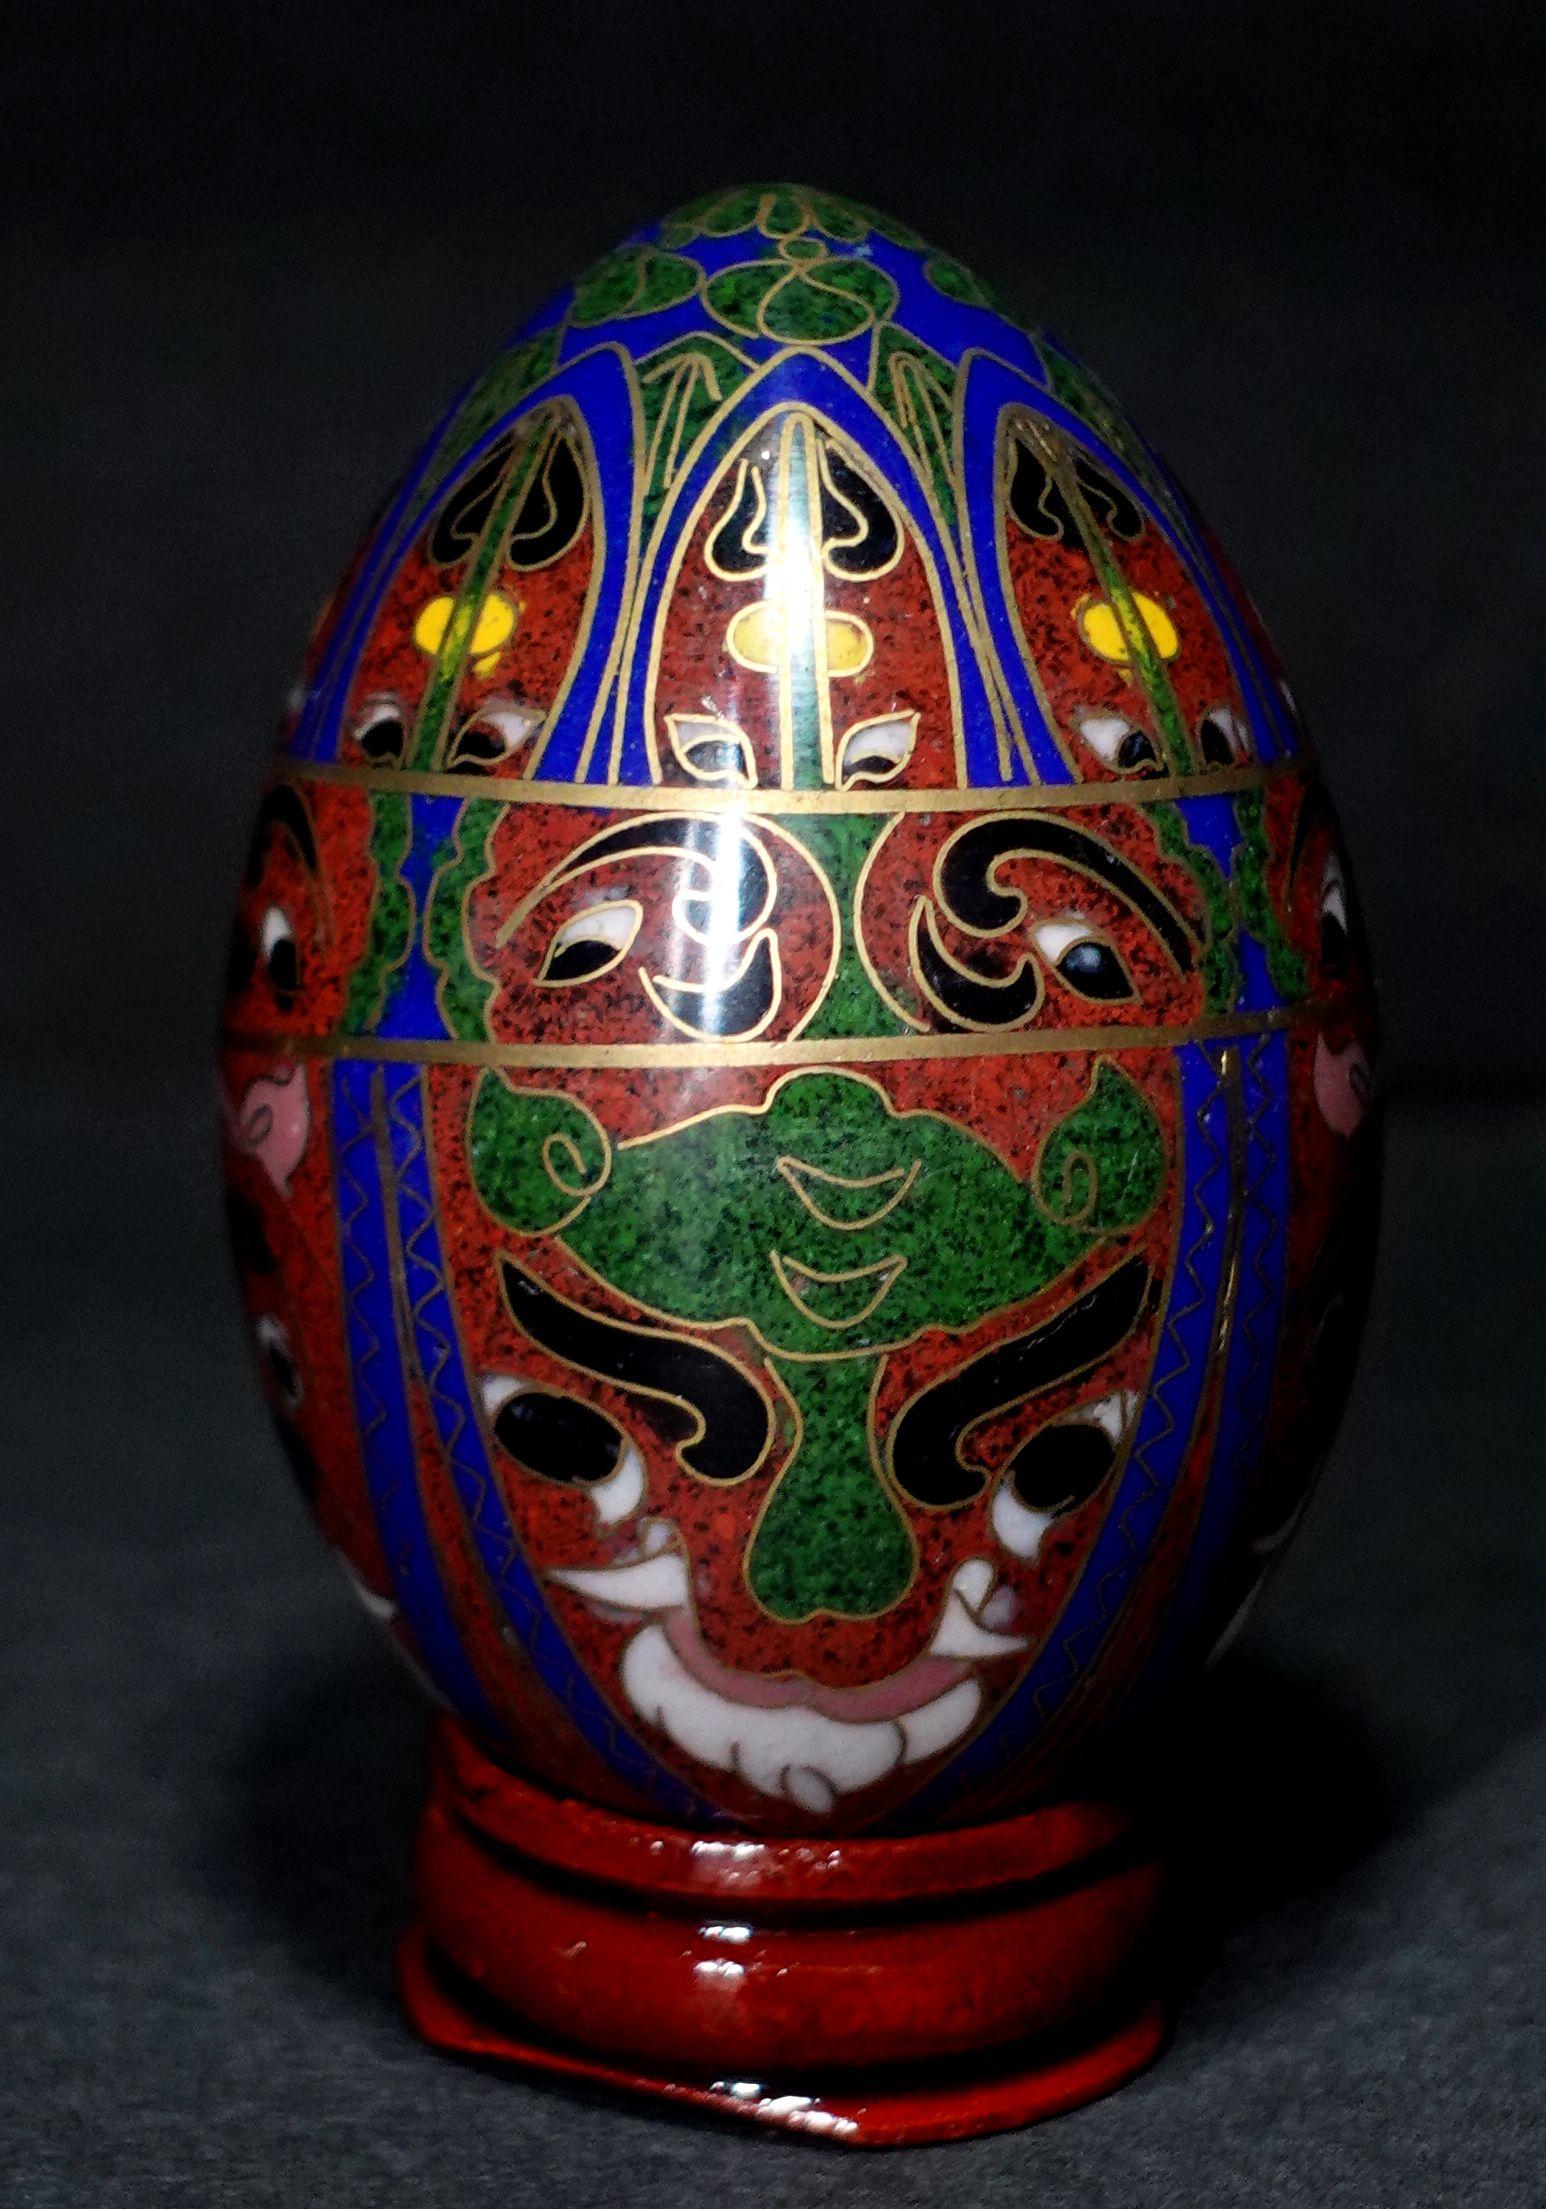 Presenting a beautiful Chinese cloisonné enamel egg depicting the faces of the Chinese traditional opera theme with a wood stand, early 20 century.